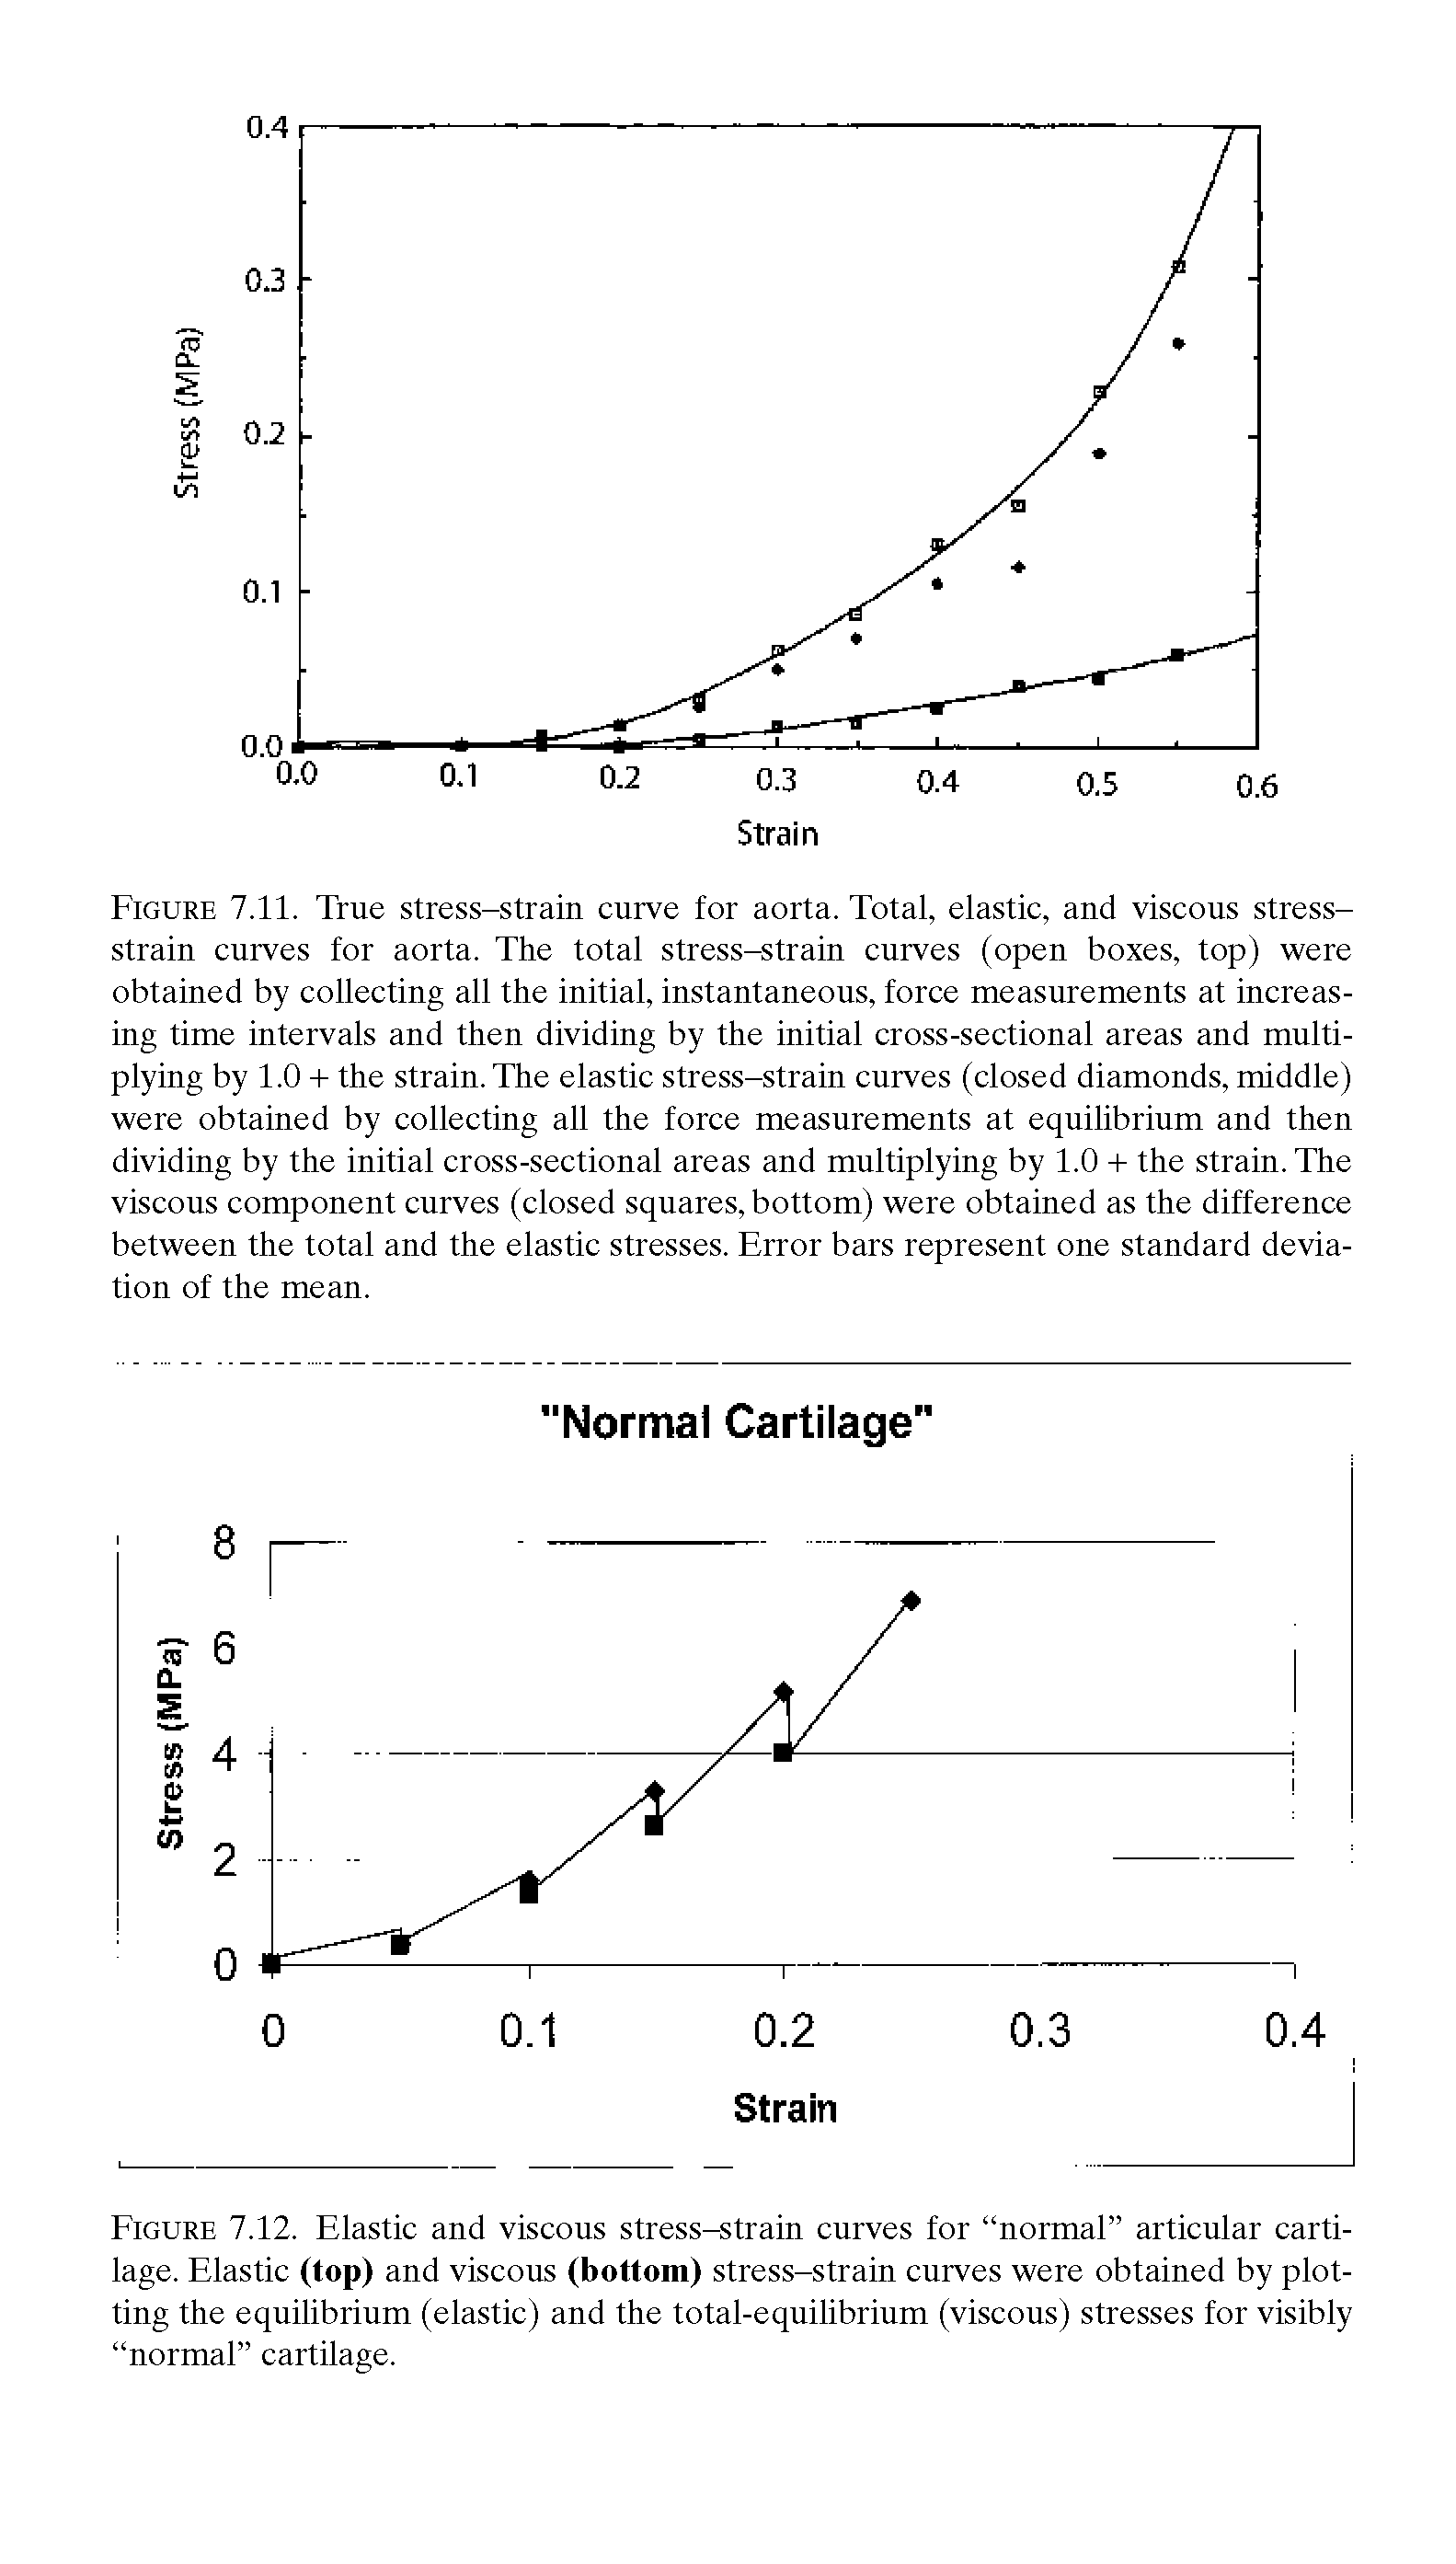 Figure 7.12. Elastic and viscous stress-strain curves for normal articular cartilage. Elastic (top) and viscous (bottom) stress-strain curves were obtained by plotting the equilibrium (elastic) and the total-equilibrium (viscous) stresses for visibly normal cartilage.